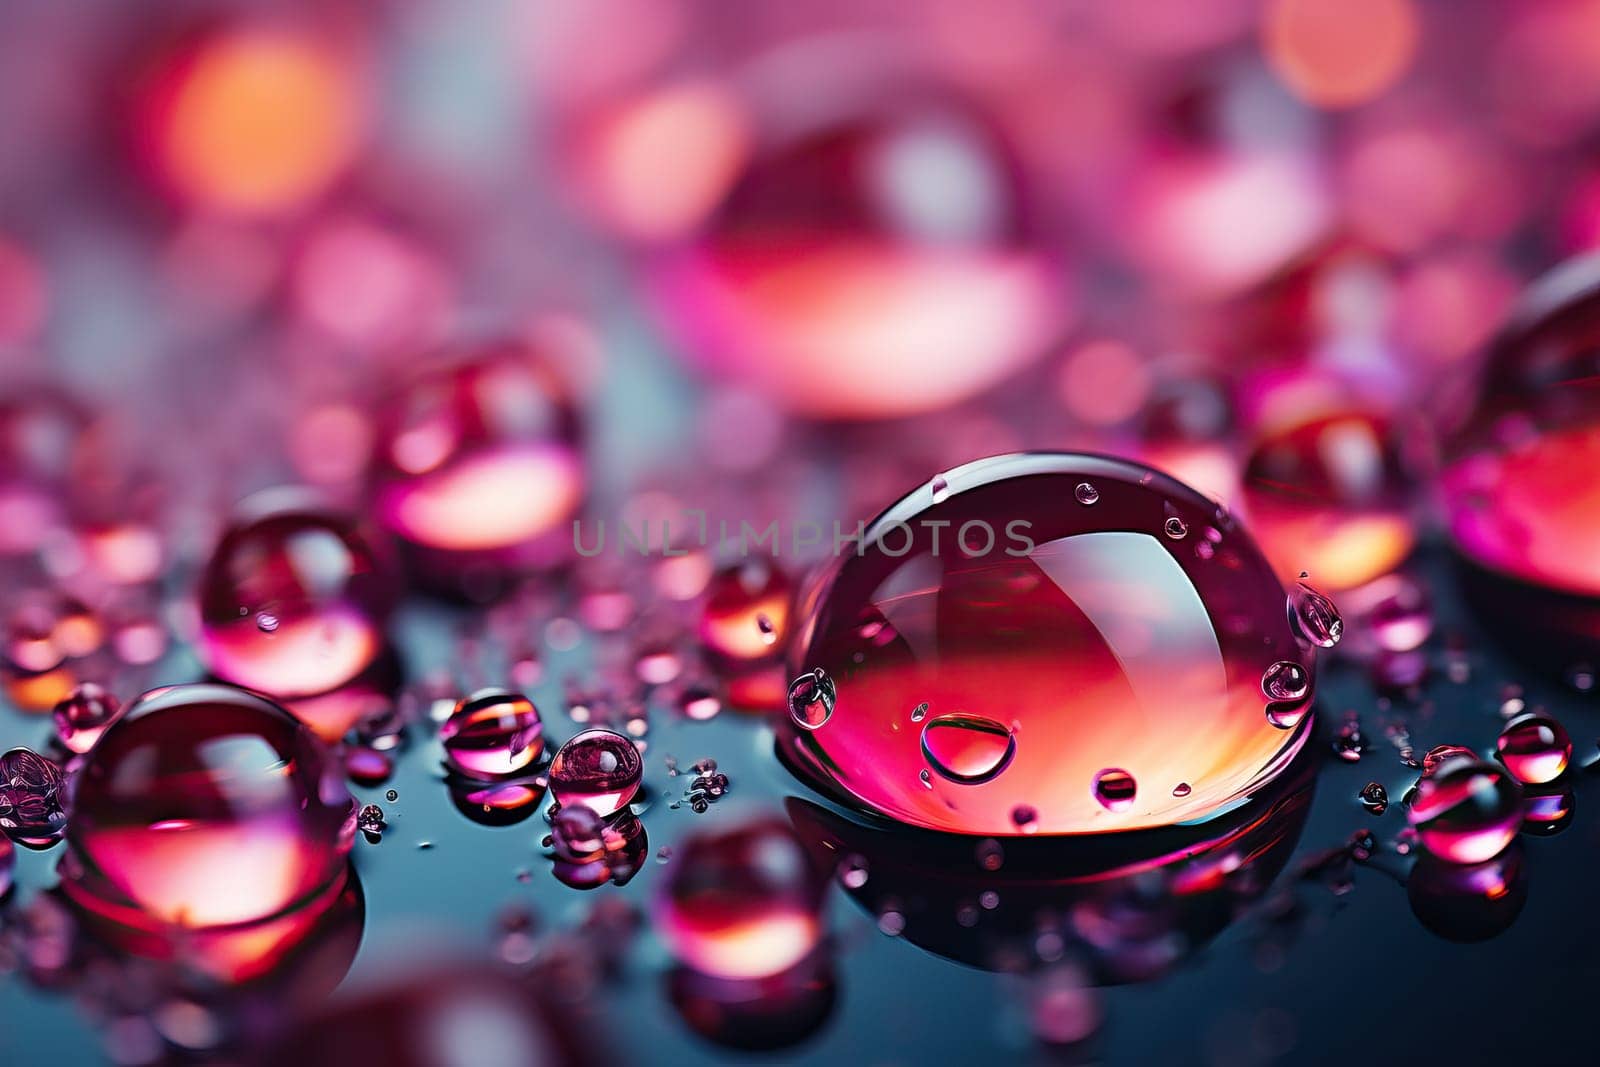 Magenta background with transparent water drops close-up, magenta background with round liquid drops.